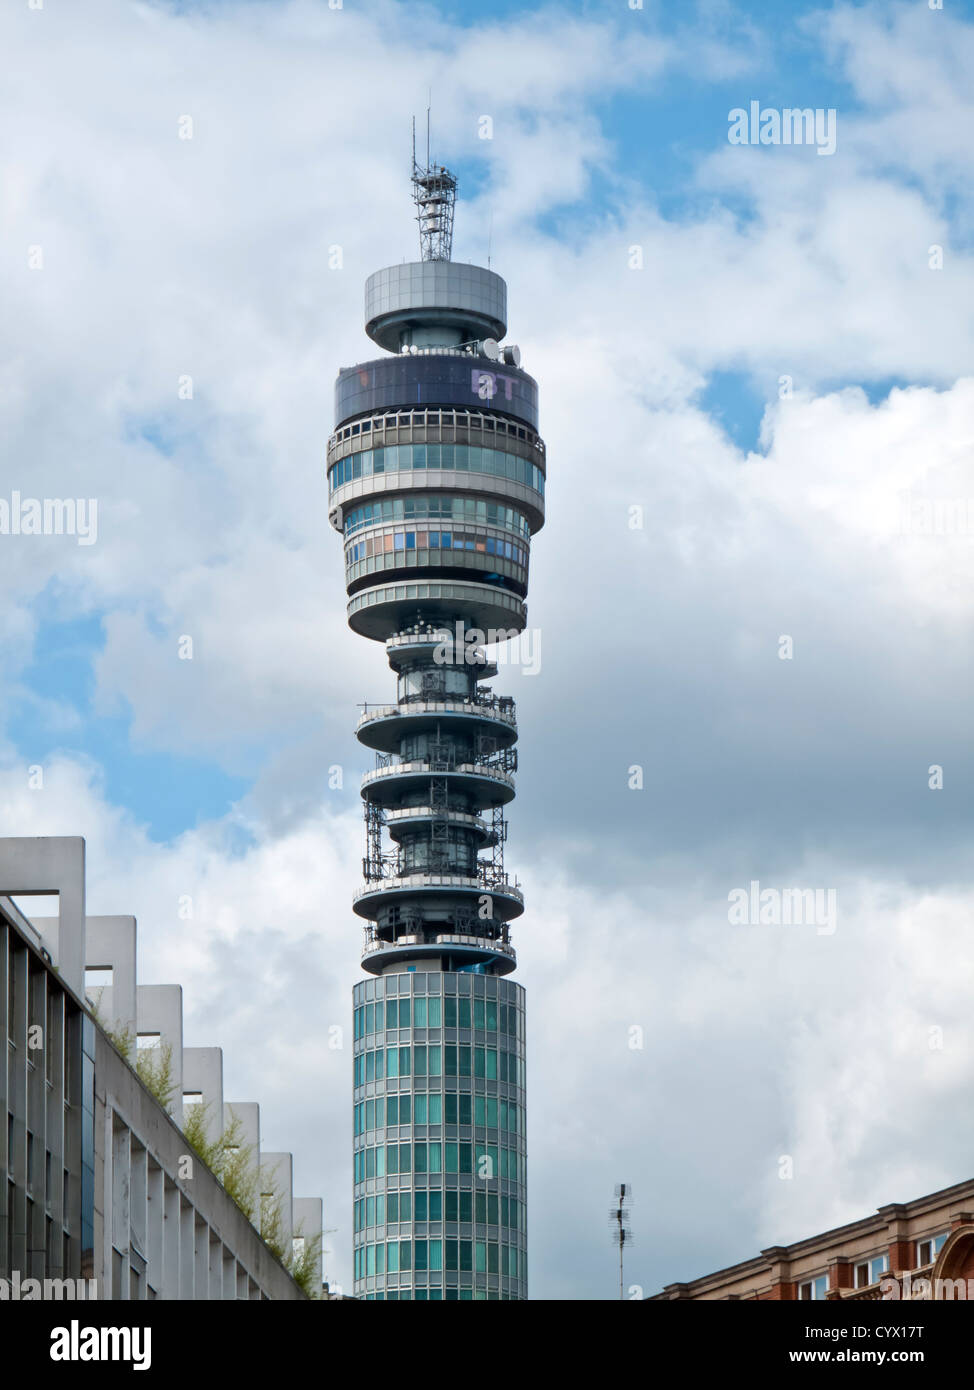 BT Tower, Fitzrovia, Londres, Angleterre, Royaume-Uni Banque D'Images